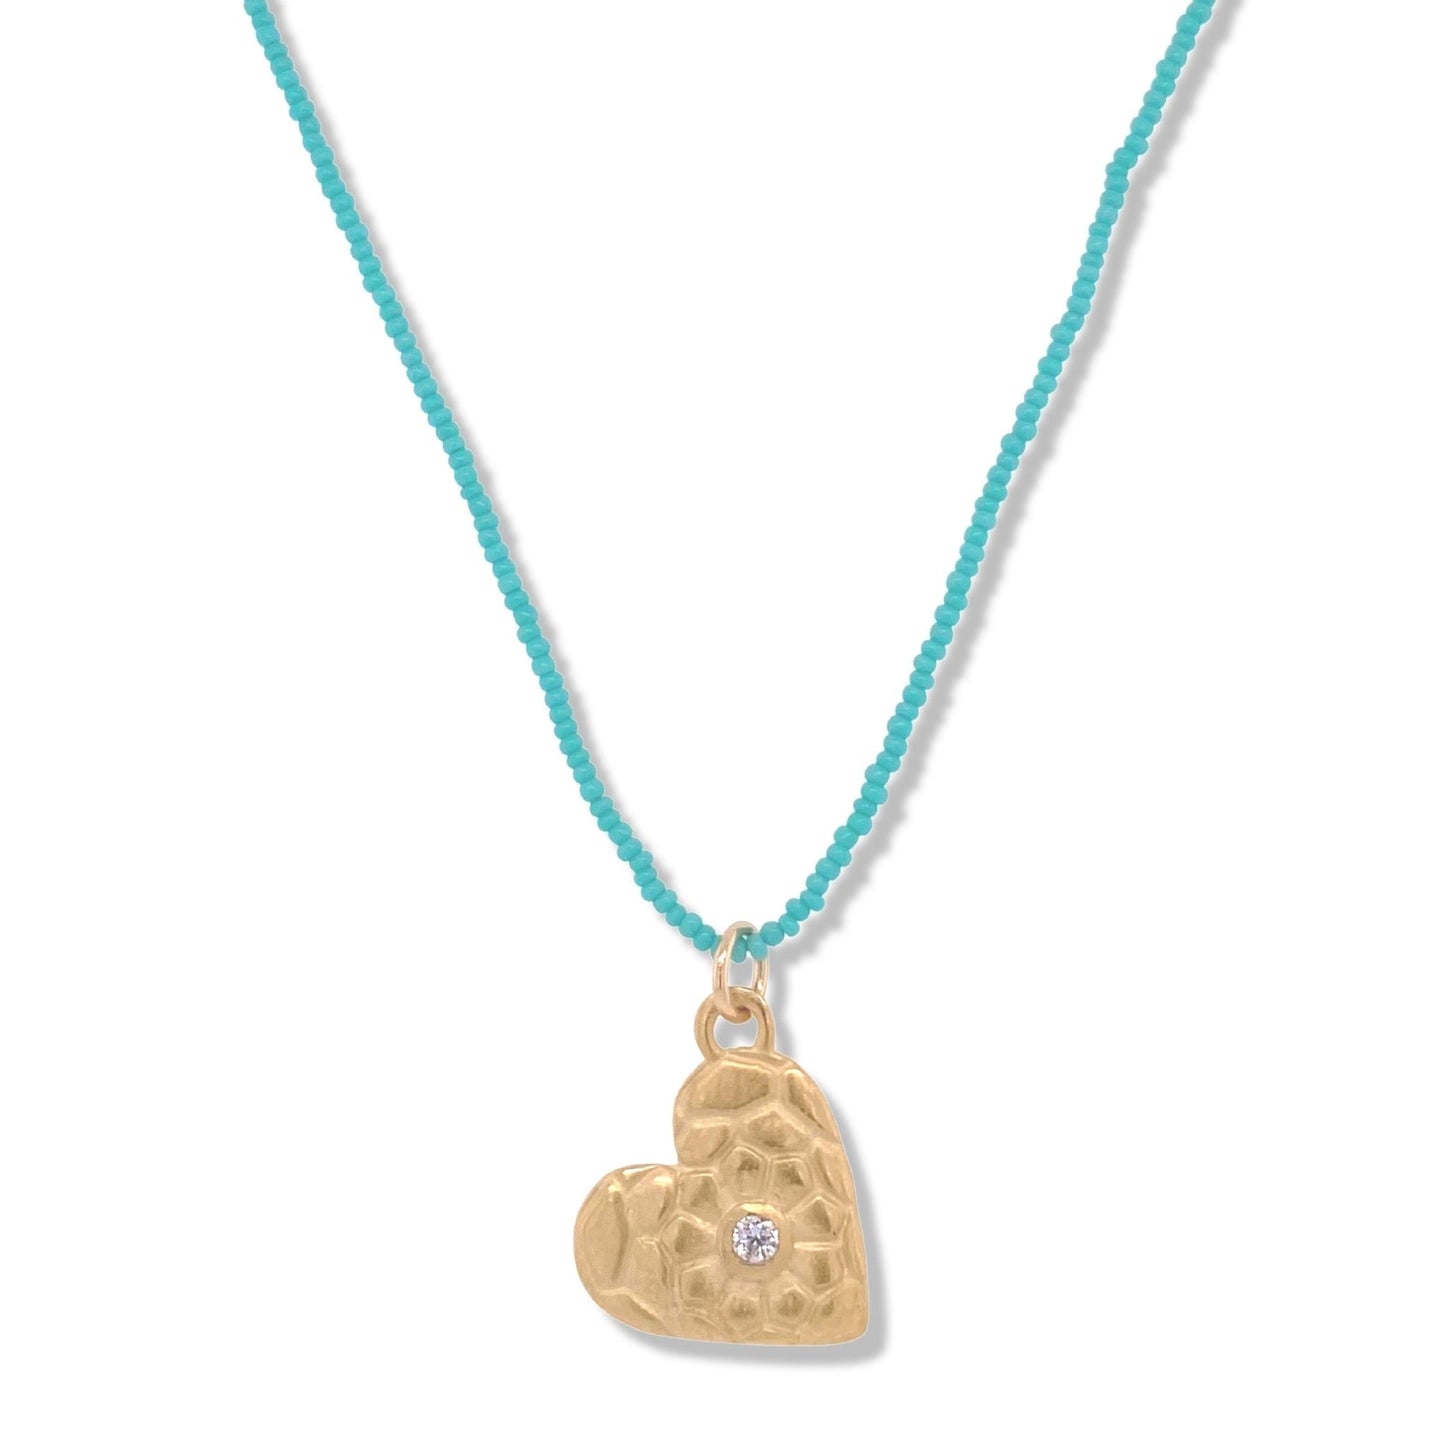 Fez Heart Necklace in Gold on Turquoise Beads | Nalu | Nantucket